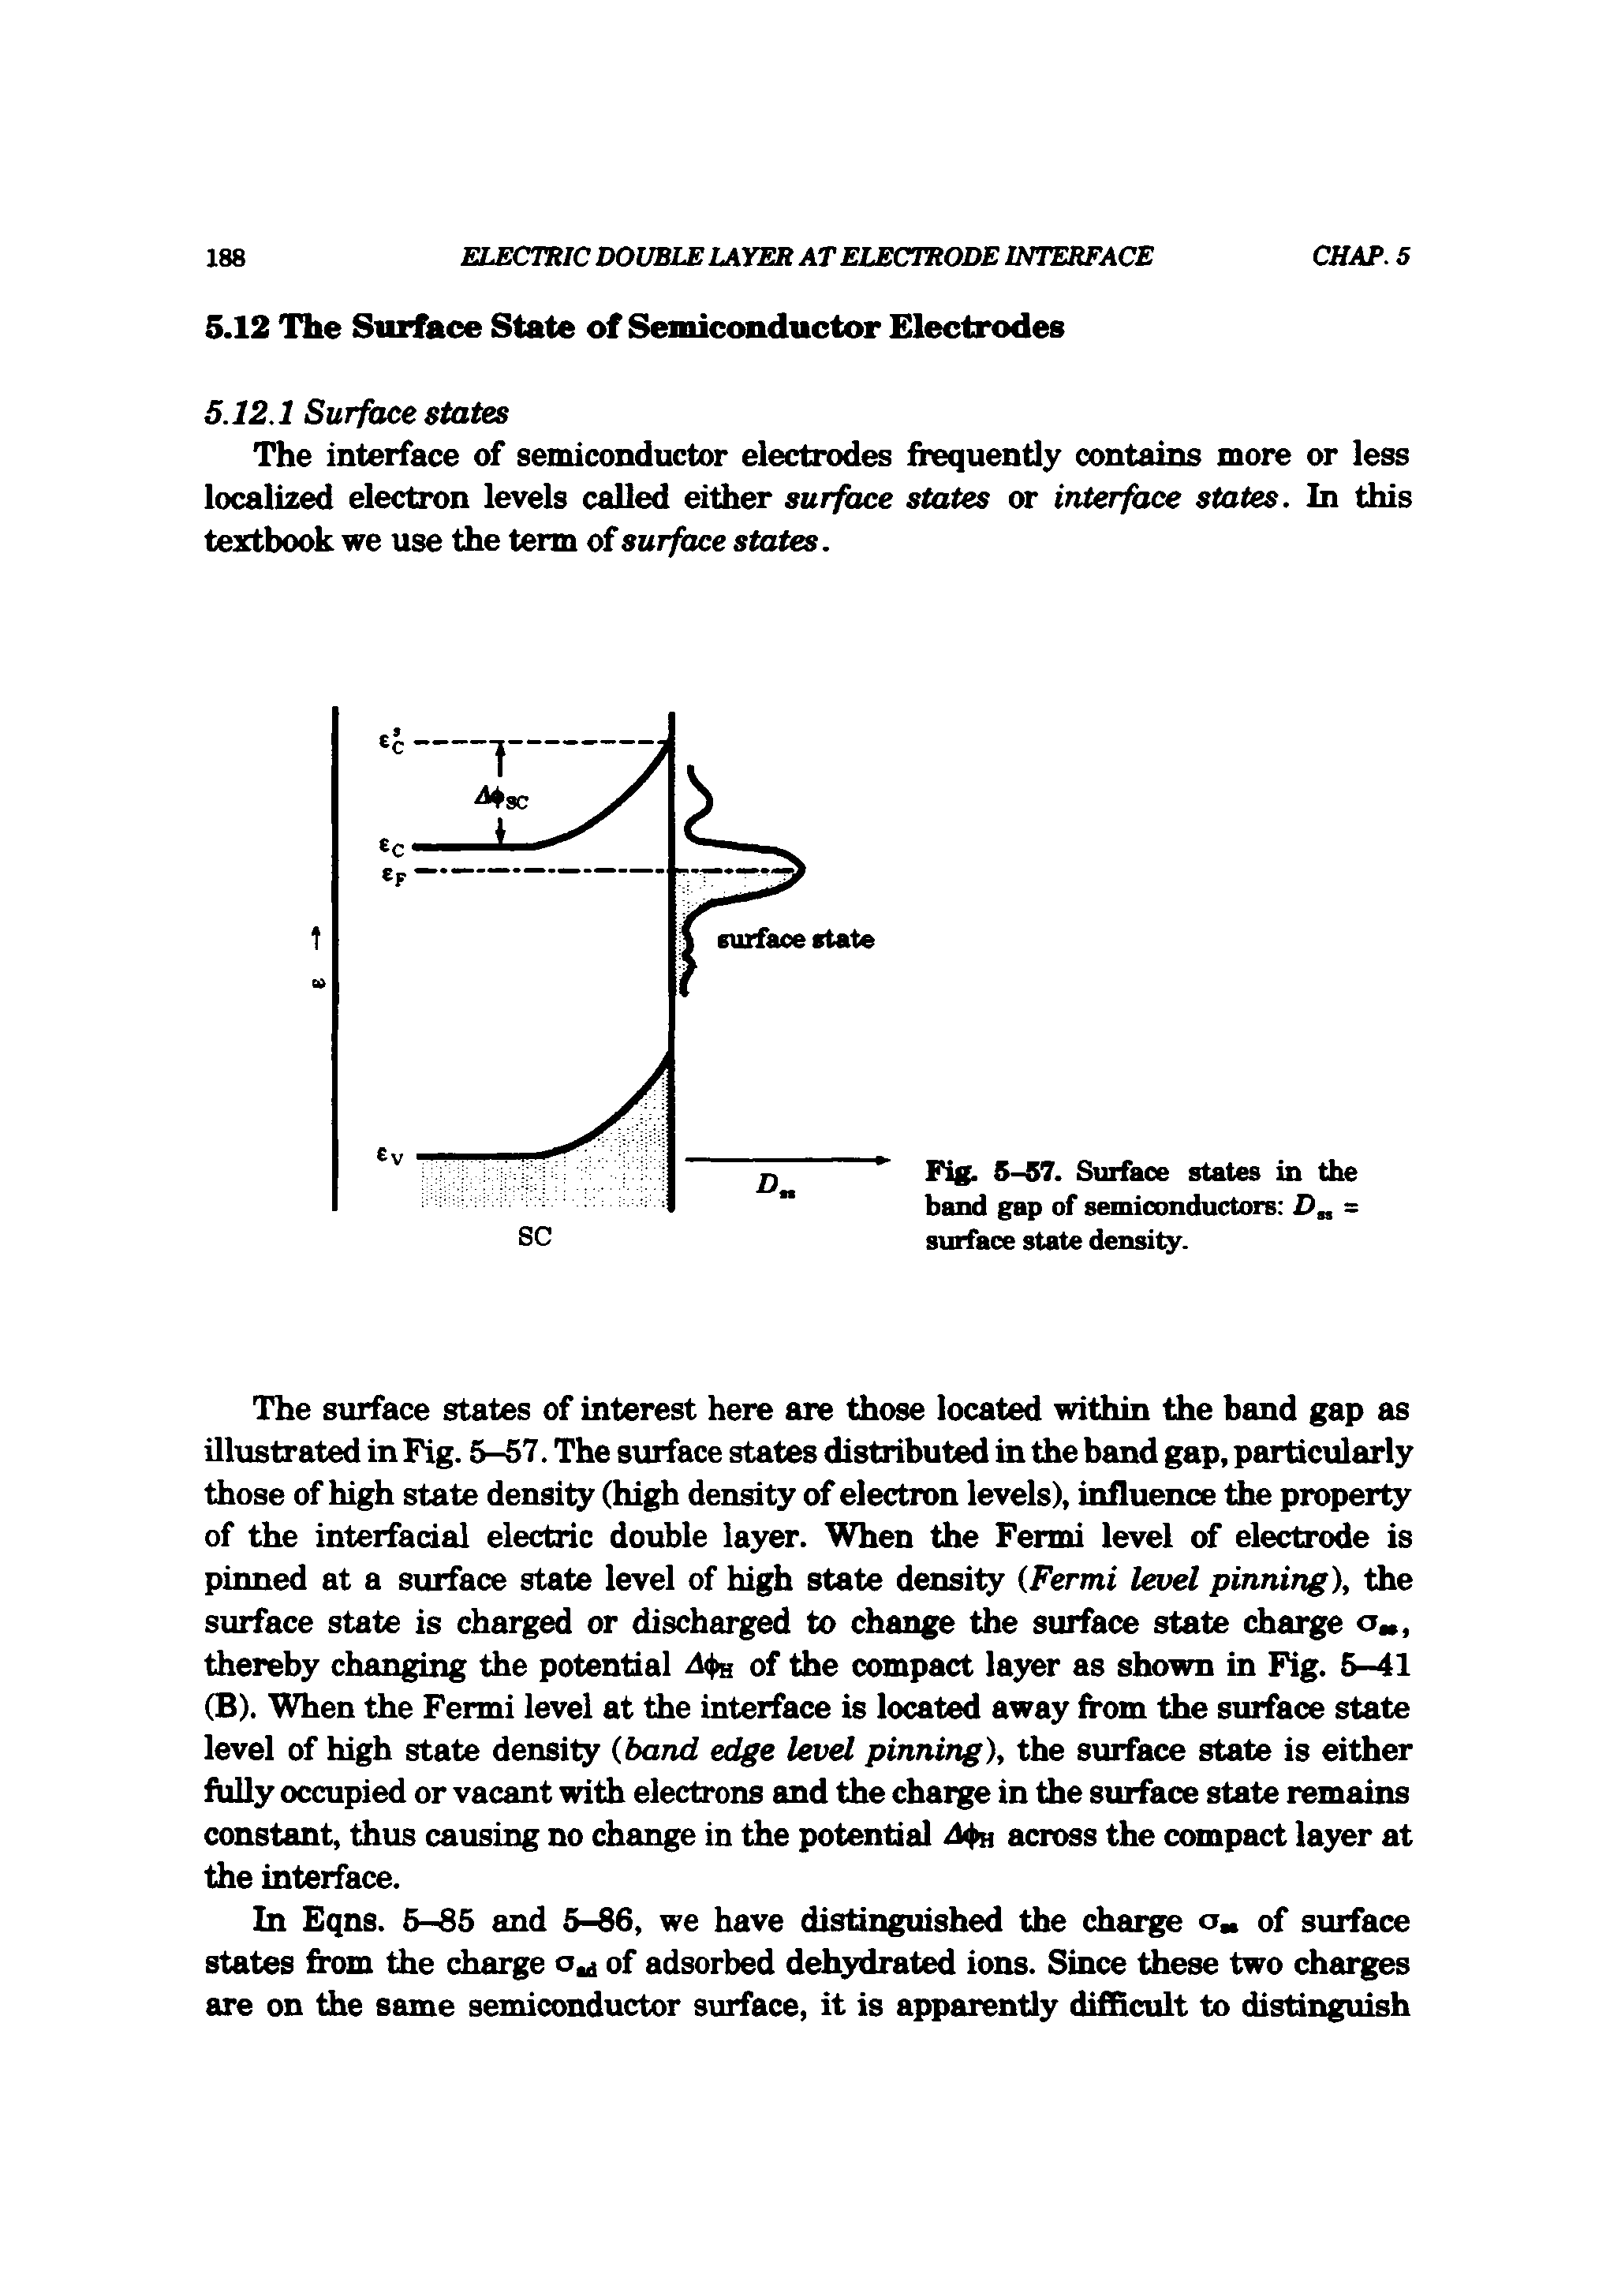 Fig. 5-57. Surface states in the band gap of semiconductors Z> = surface state density.